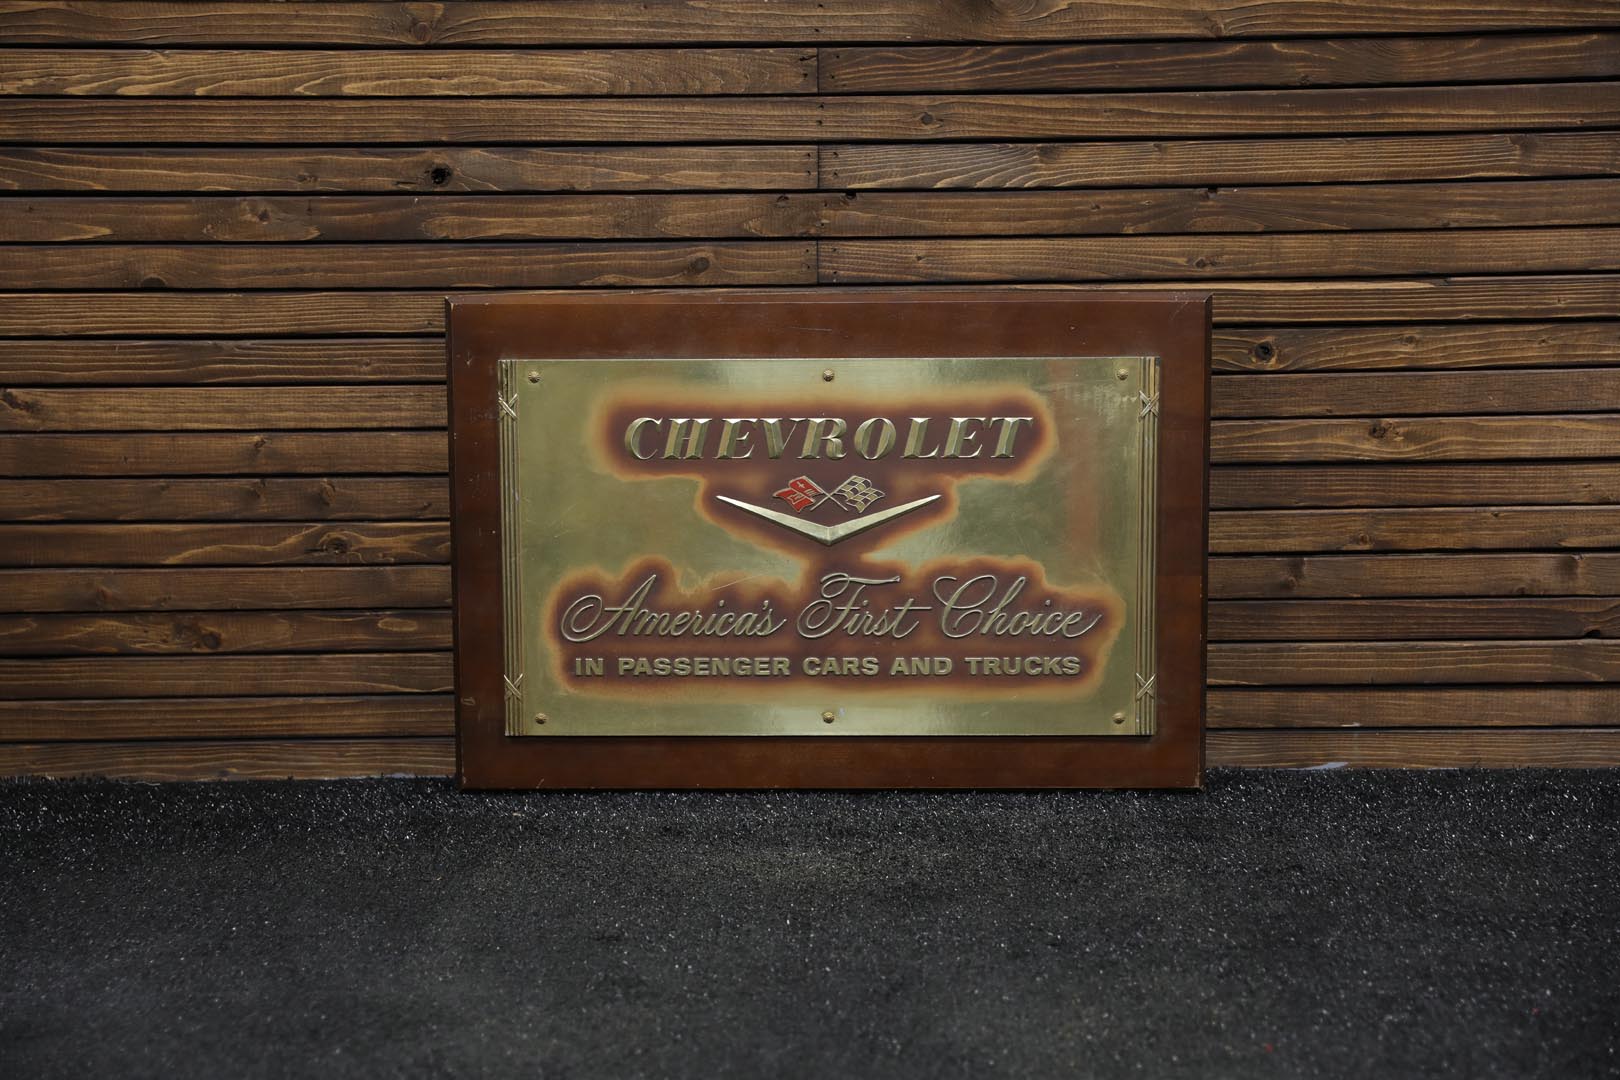 1950s Chevrolet Dealership Plaque - America's First Choice